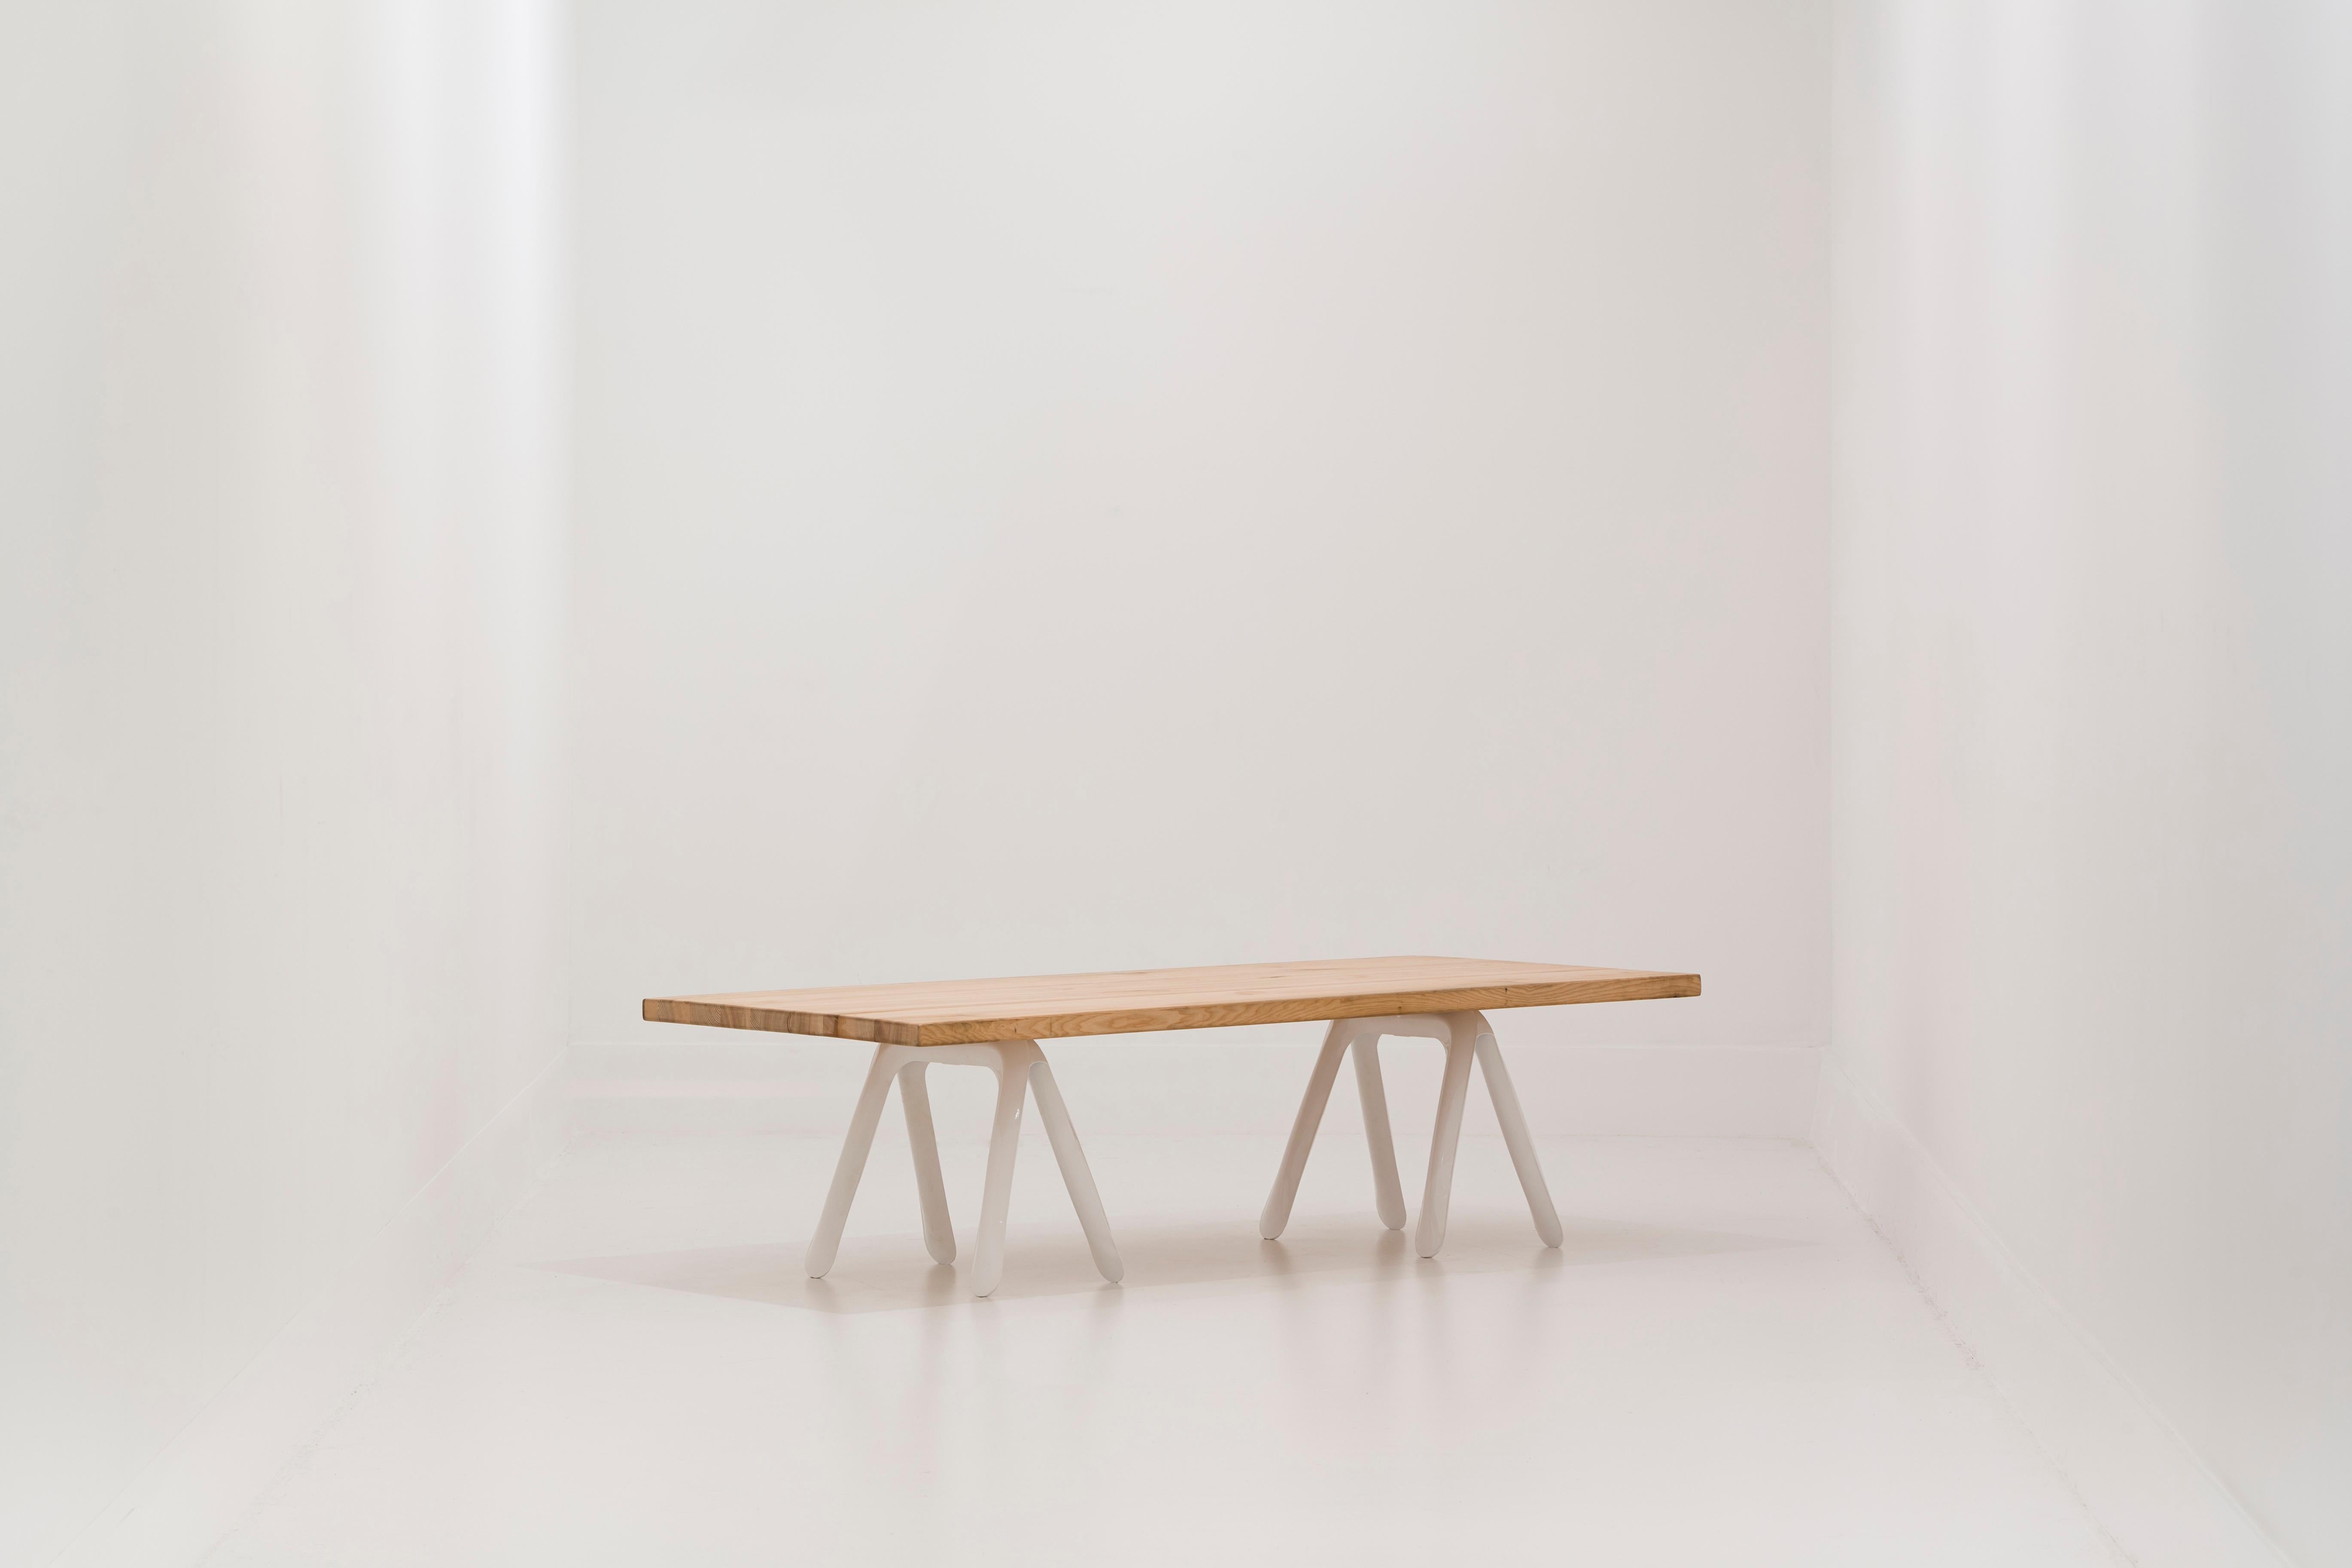 Kozka is our new member of table structures. It is a multitasking construction. Acording to different table tops, it could be used either as a coffee table or even as a part of unique bench.

Kozka is available in Stainless steel and Carbon steel